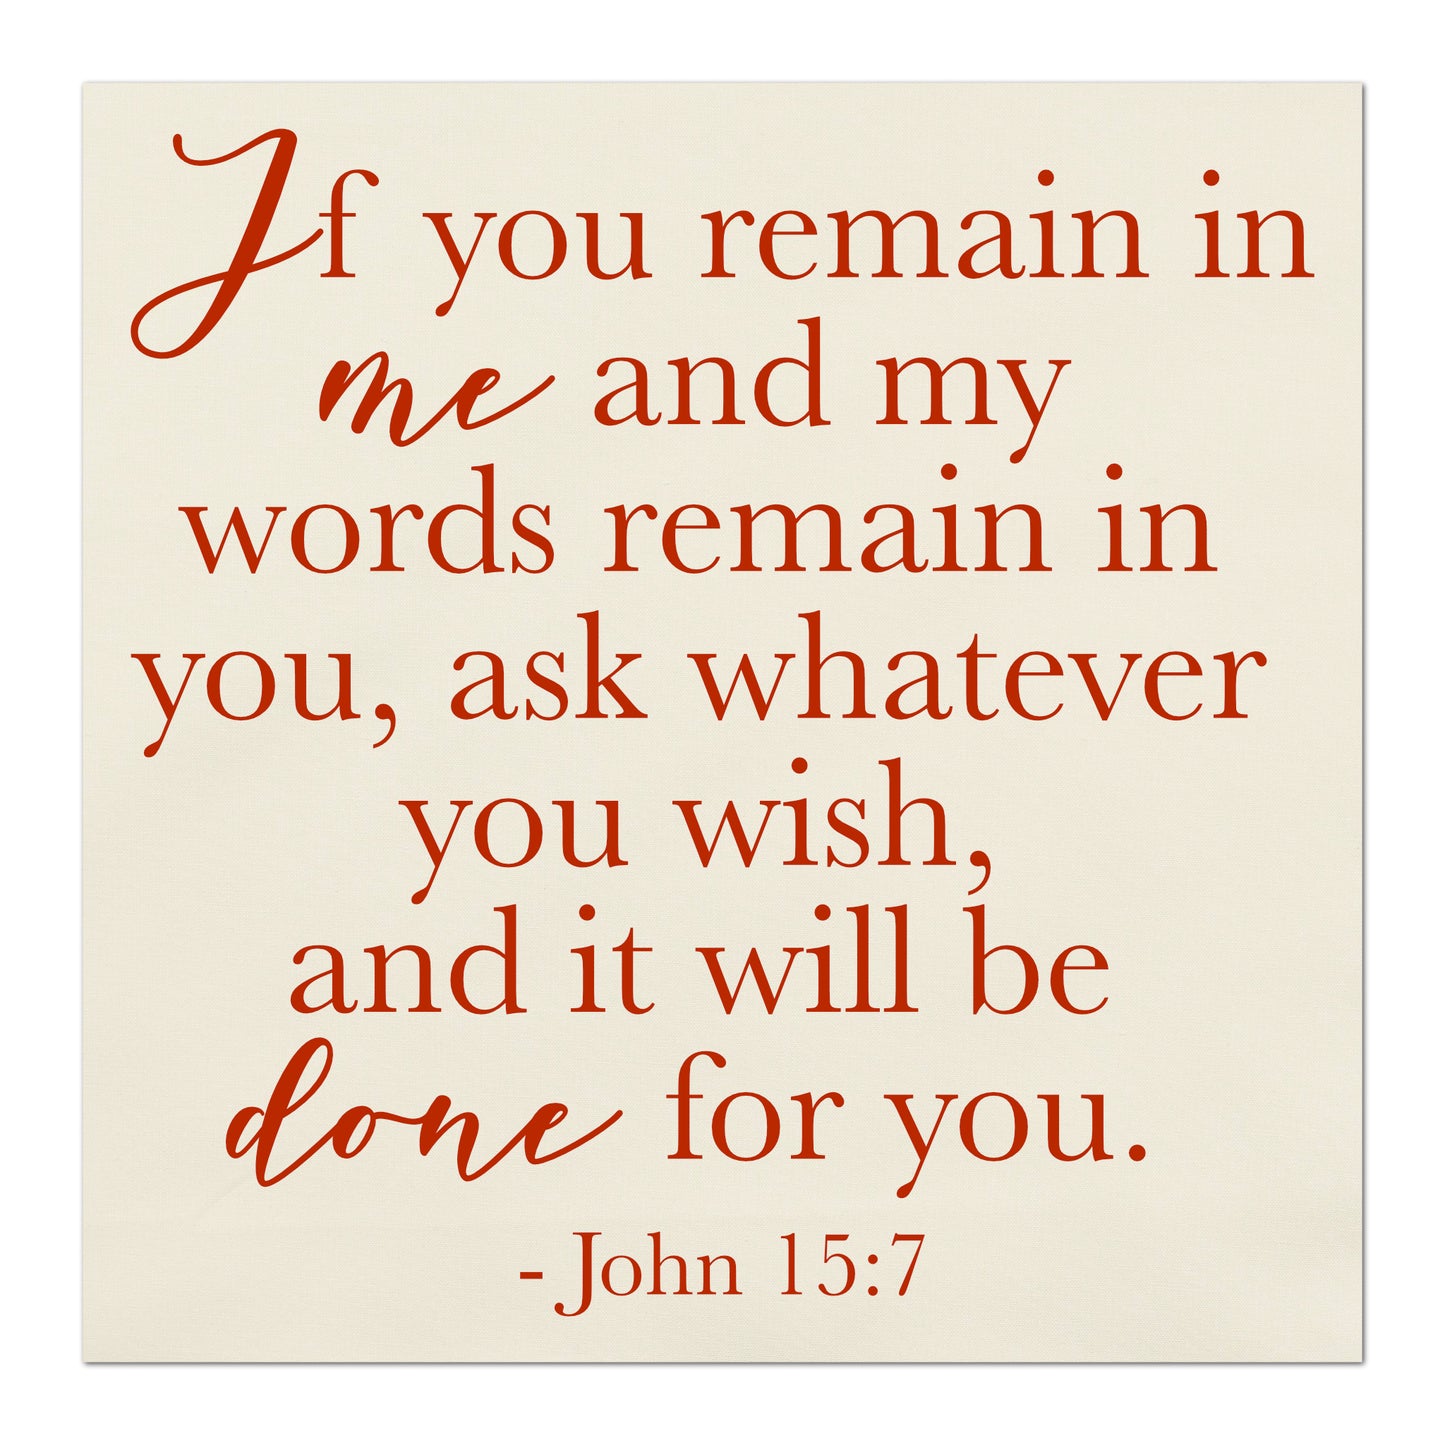 Bible Verse Wall Art - If you remain in me and my words remain in you, ask whatever you wish, and it will be done for you.  -  John 15 7 - Scripture Fabric, Quilt Block, Large, Small